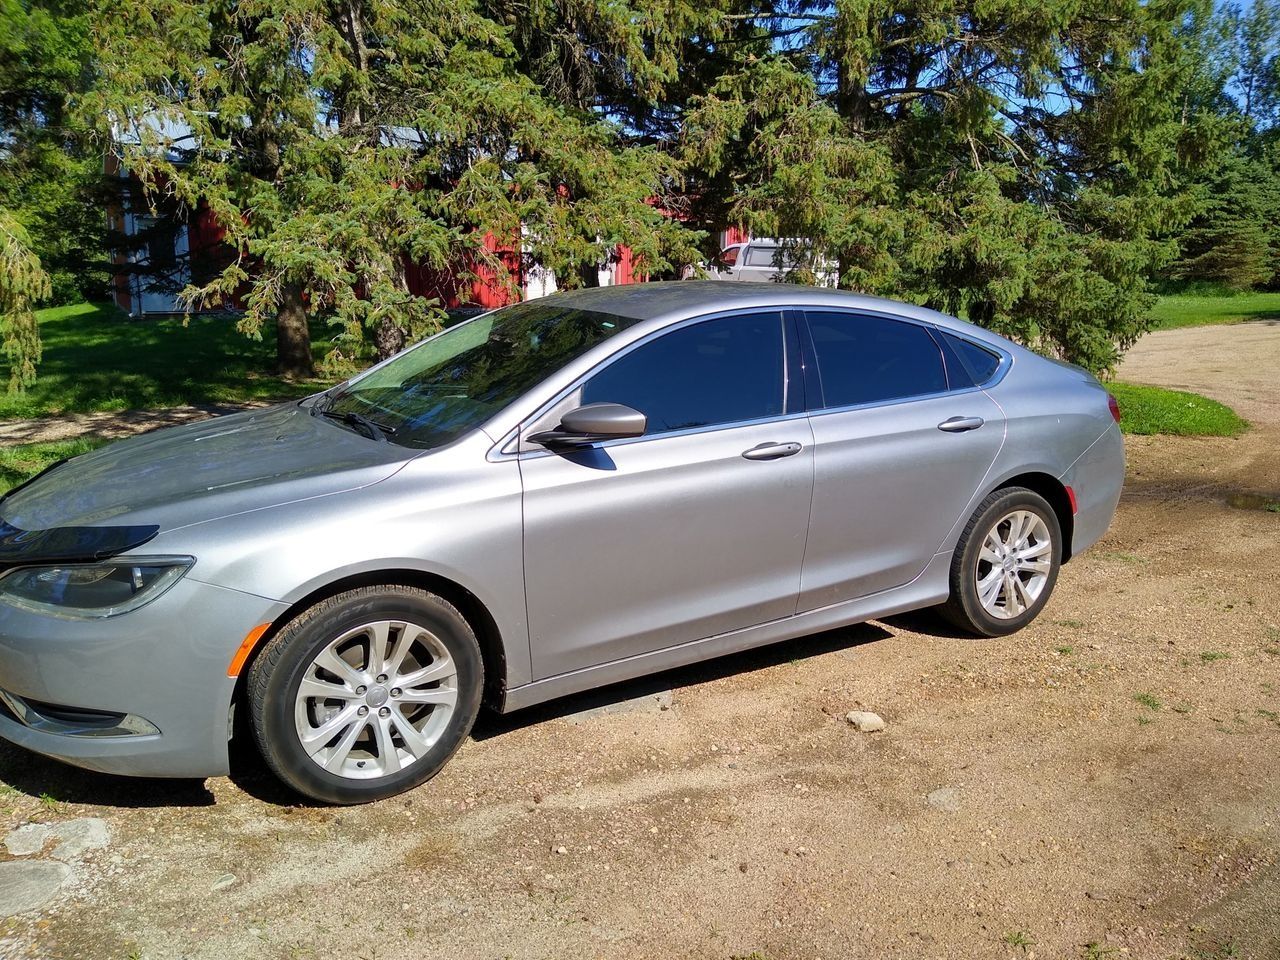 2016 Chrysler 200 Limited | Sioux Falls, SD, Billet Silver Metallic Clear Coat (Silver), Front Wheel